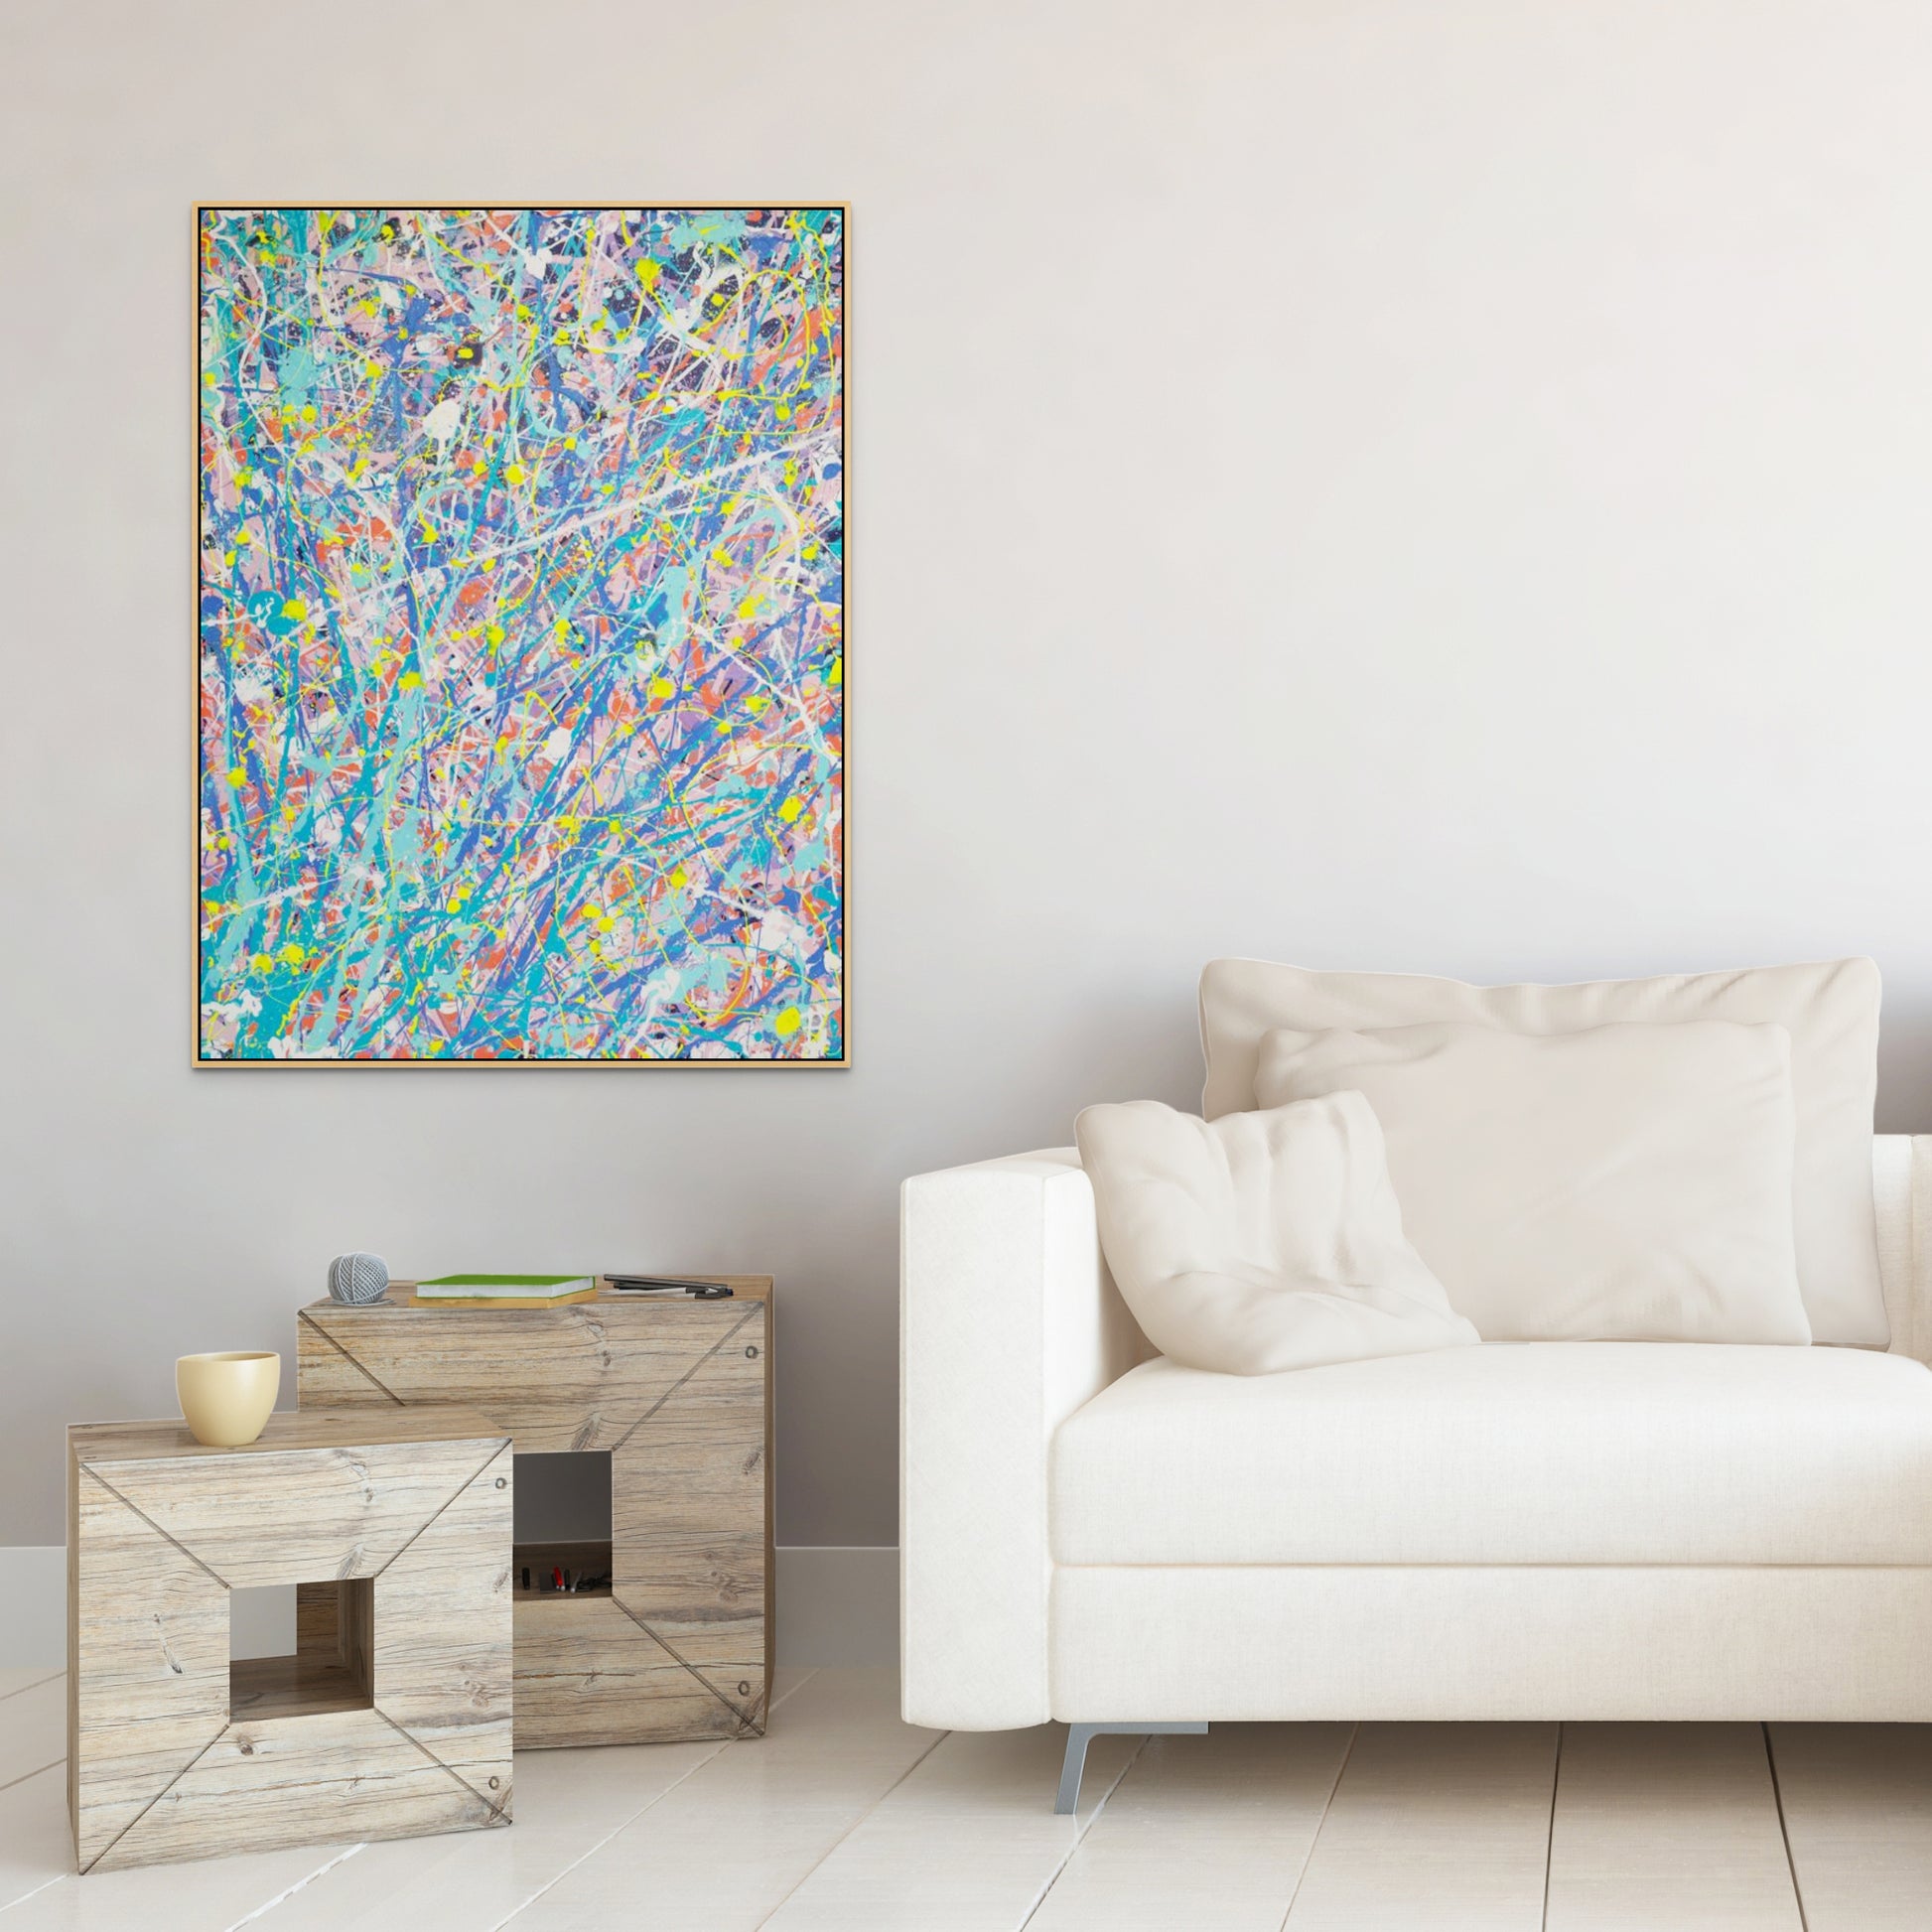 Iridescence, original abstract expressionism painting by Bridget Bradley, seen in oack frame hanging in living space with modern neutral decor